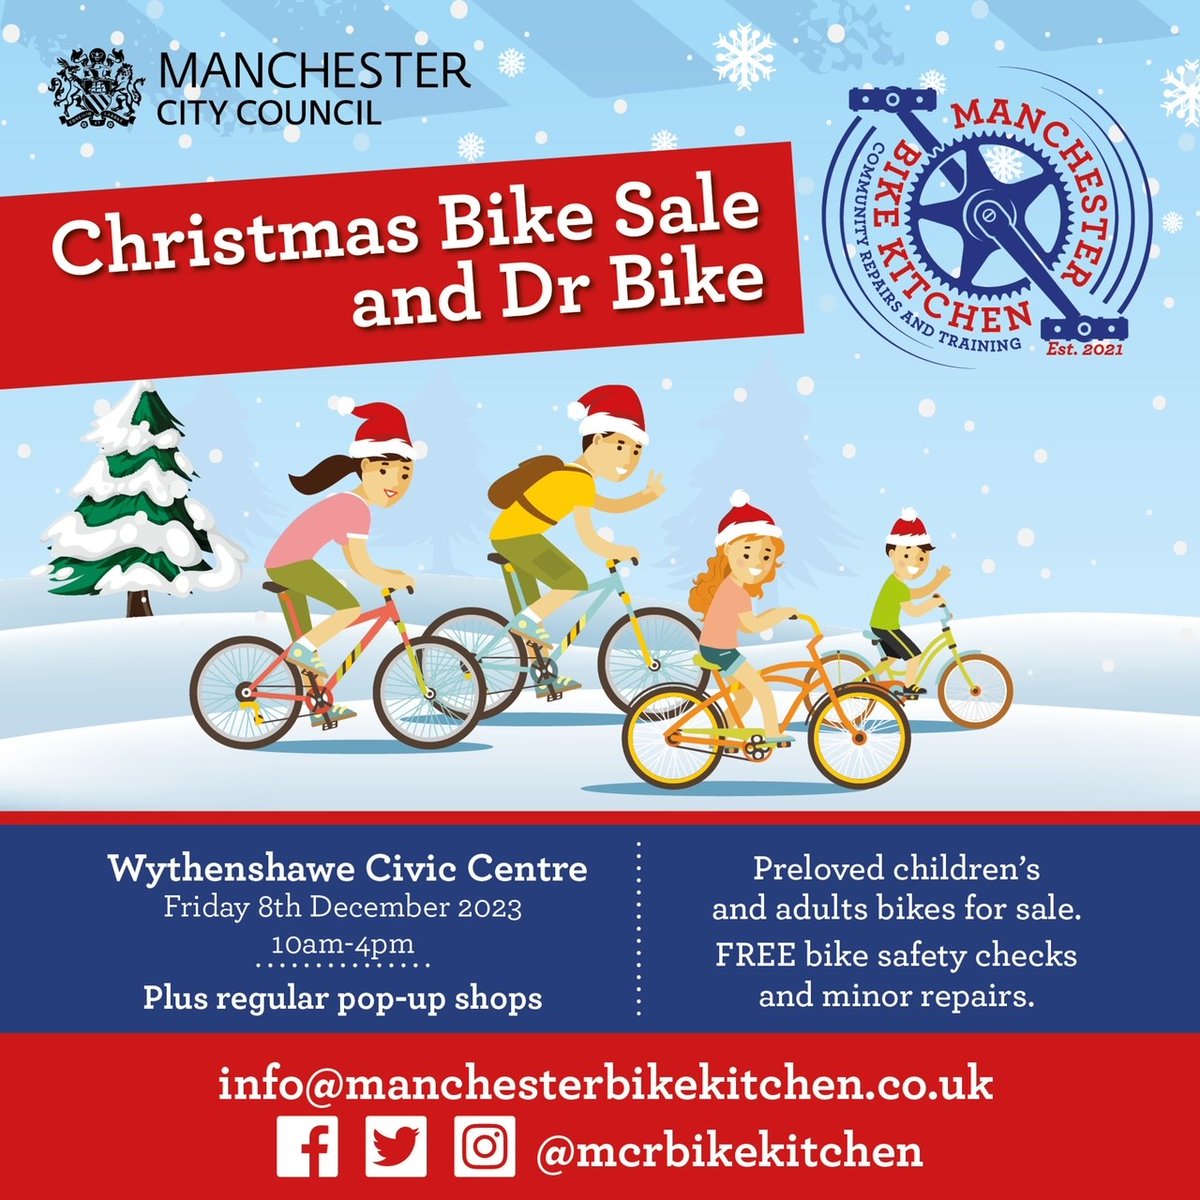 Christmas Bike Sale & Dr. Bike Manchester Bike Kitchen are at the Wythenshawe Civic Centre on Friday (08th December) from 10am until 4pm. Bikes for sale and free bike safety checks and repairs.